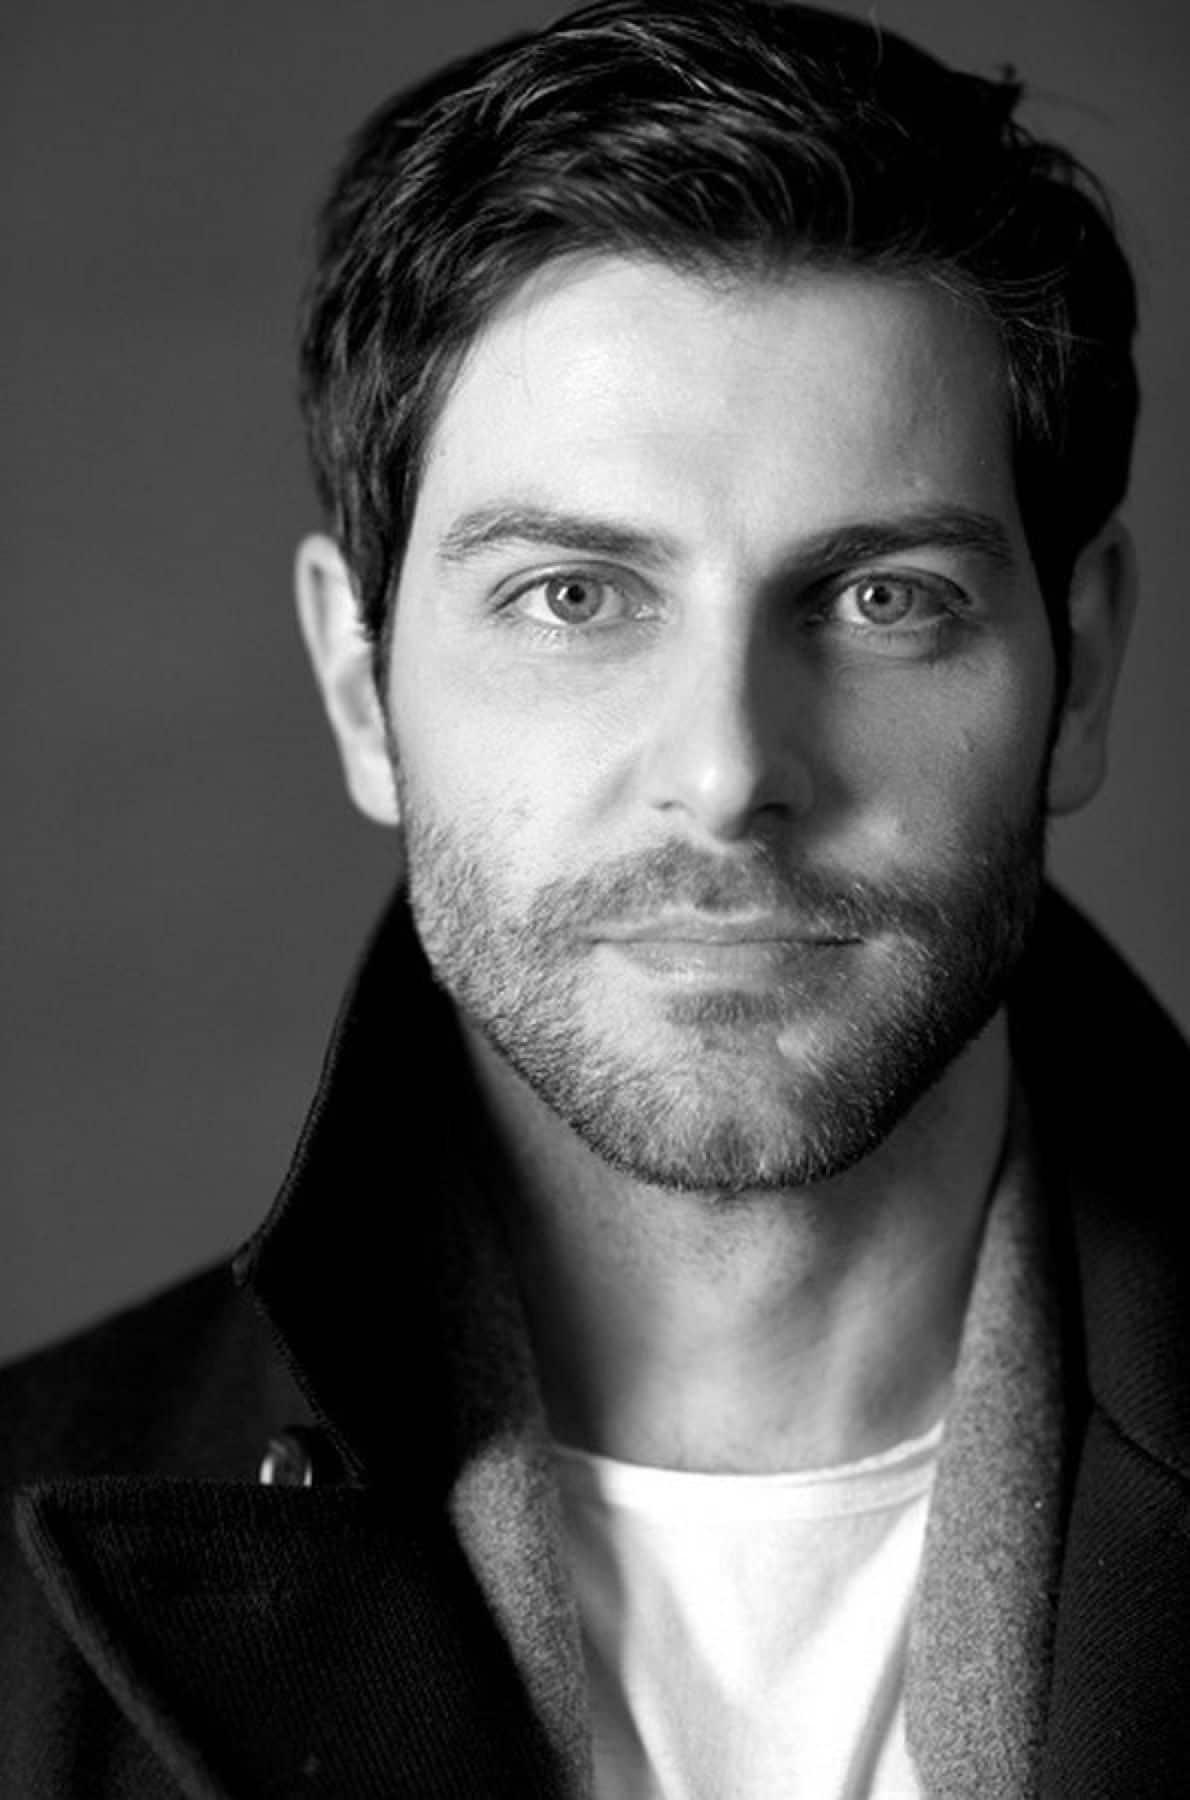 [Mission] Today's choices are tomorrow's issues David-Giuntoli